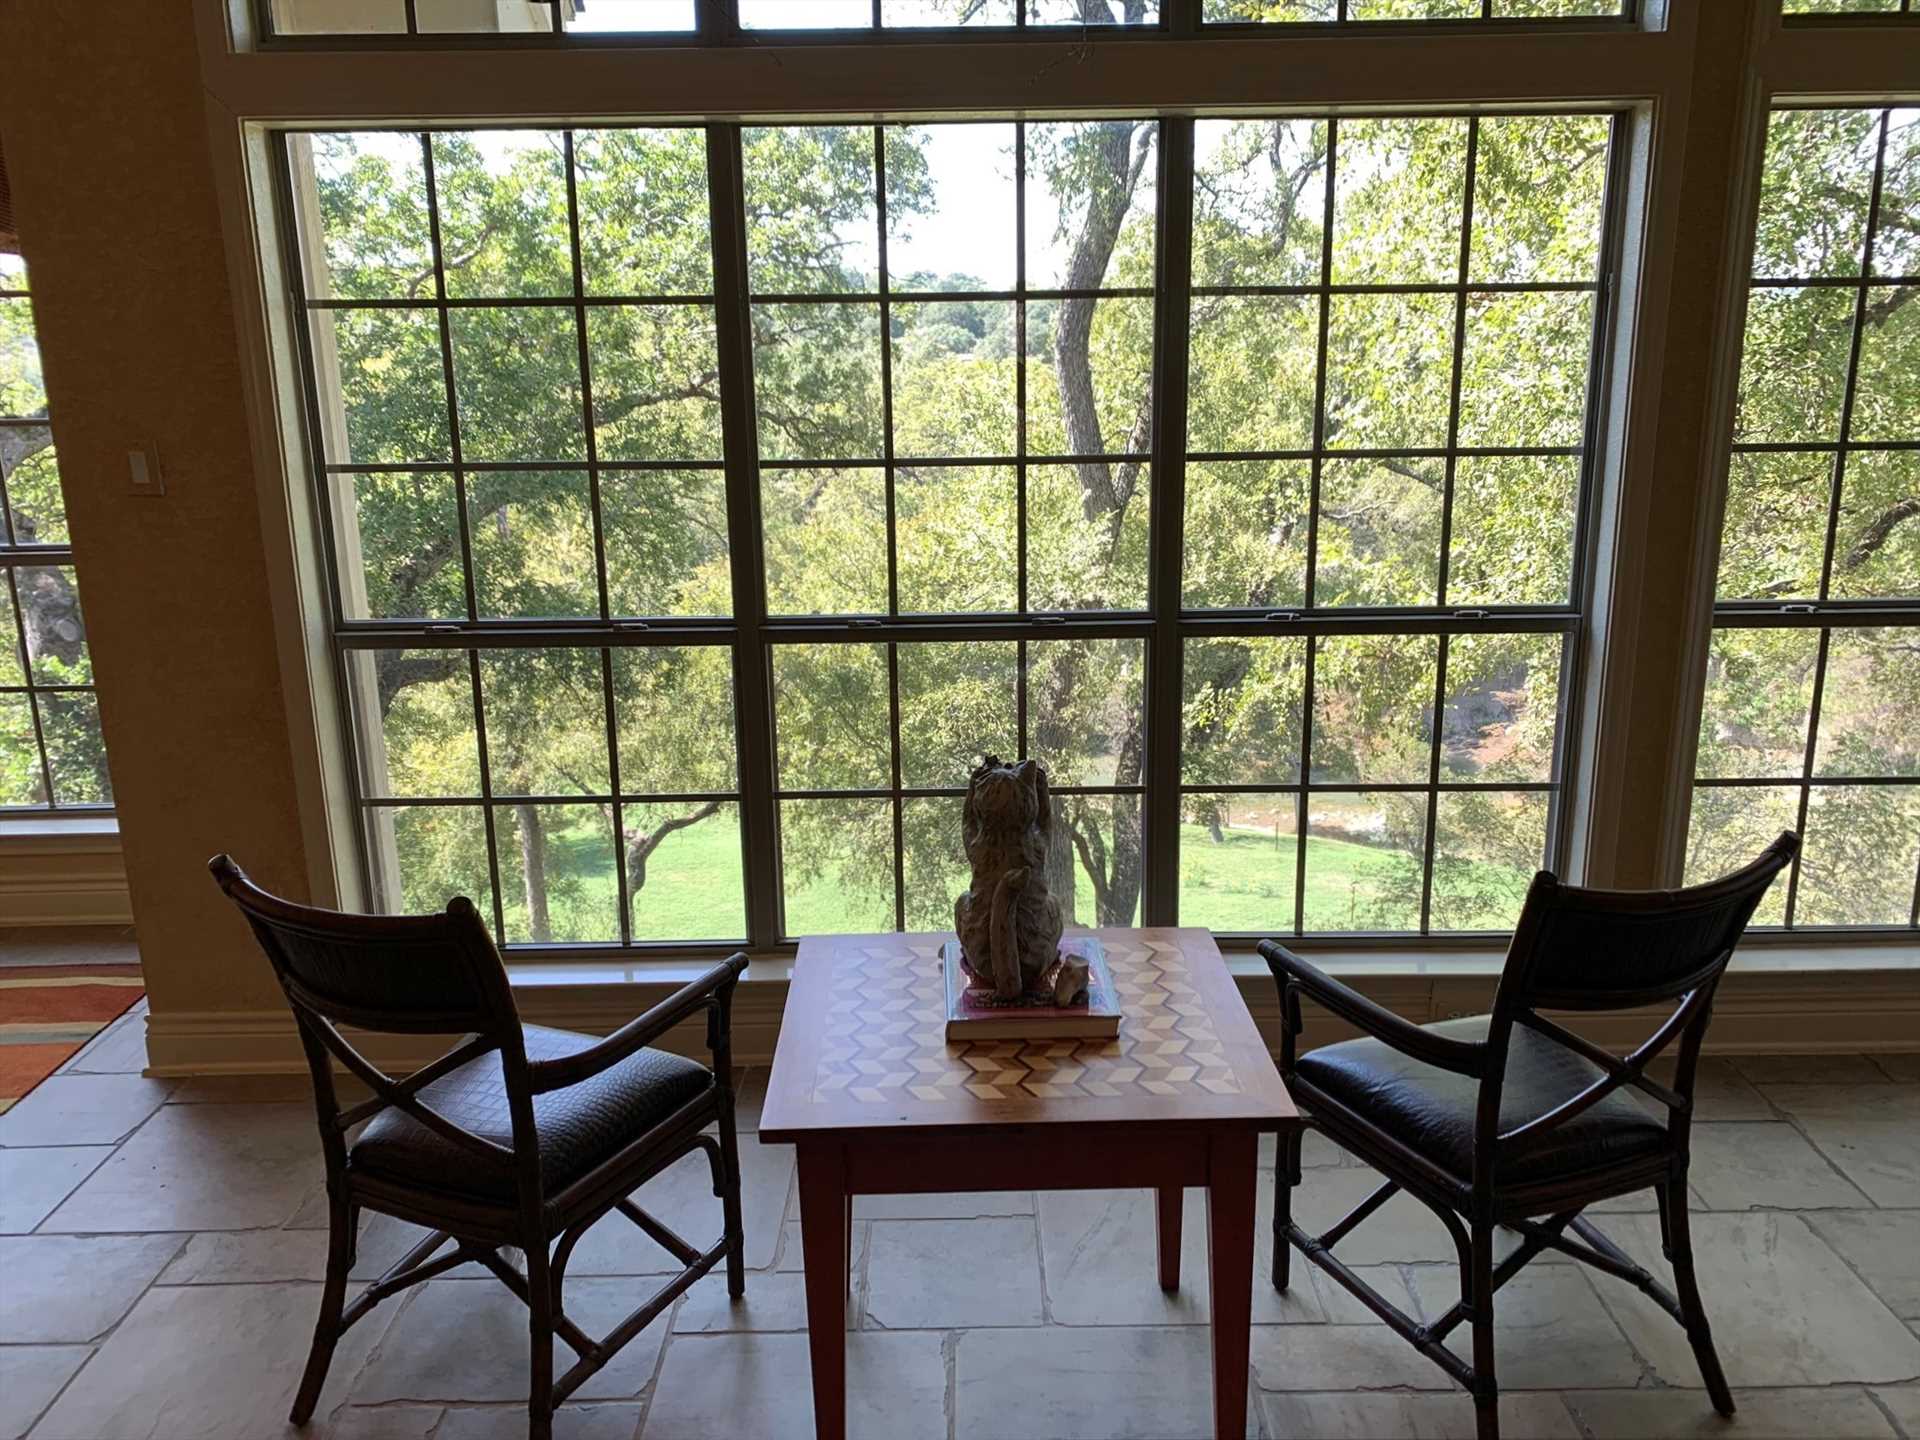                                                 Our guest Branelle shared the view she had from the living area: 